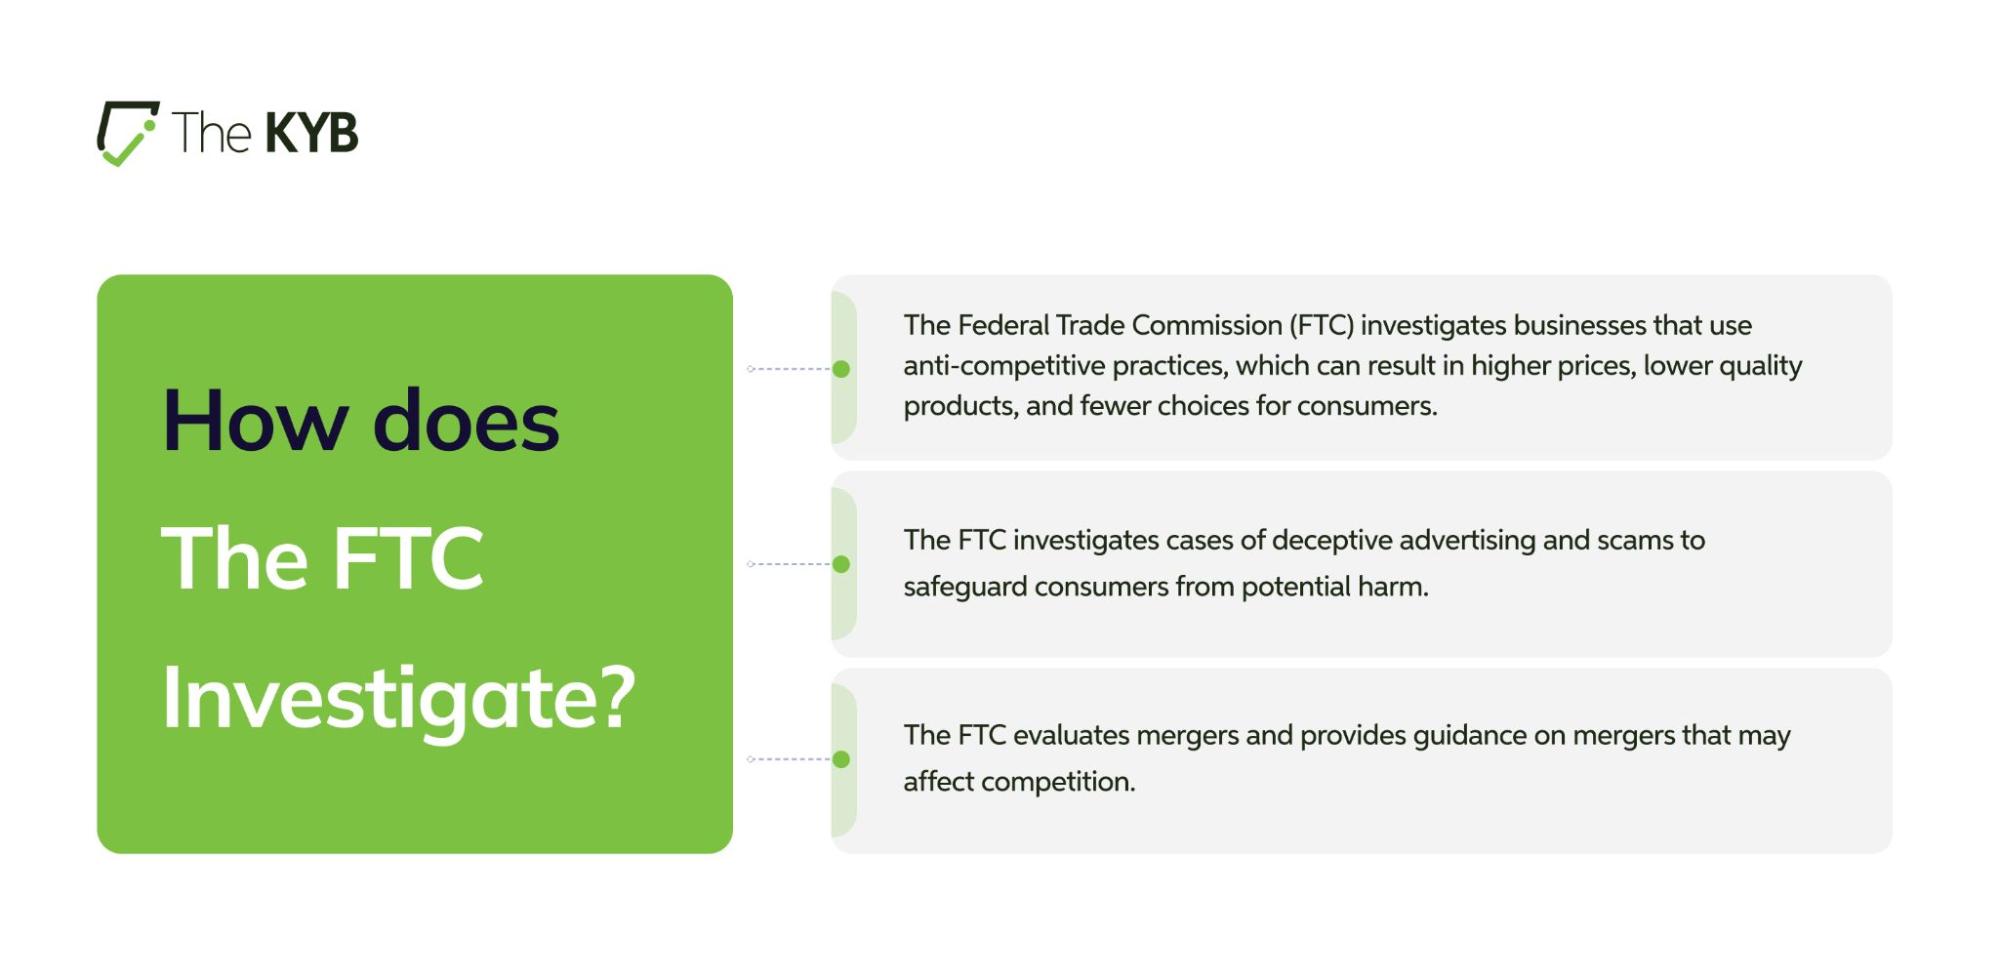 How does The FTC Investigation